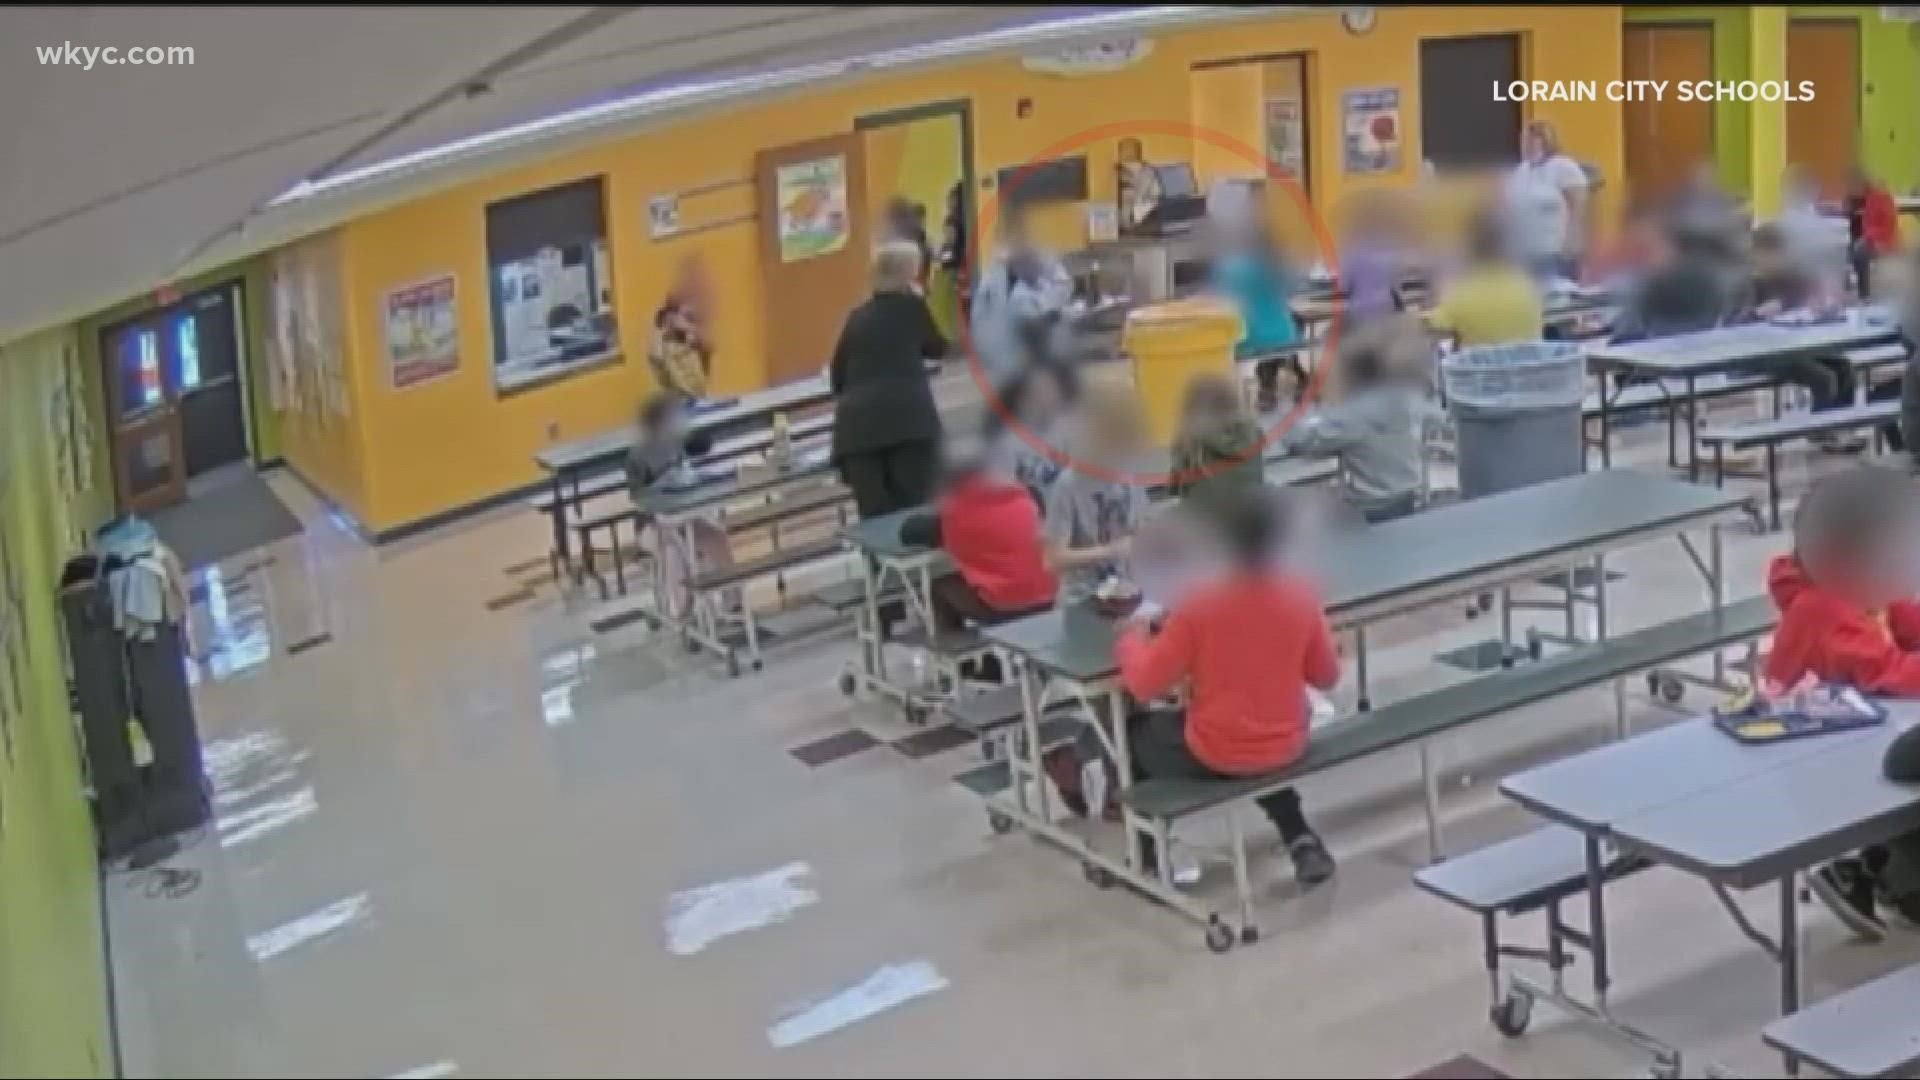 The school district released new video today from the cafeteria of Palm Elementary, showing a 9-year-old student throwing away a package of food into a trash can.